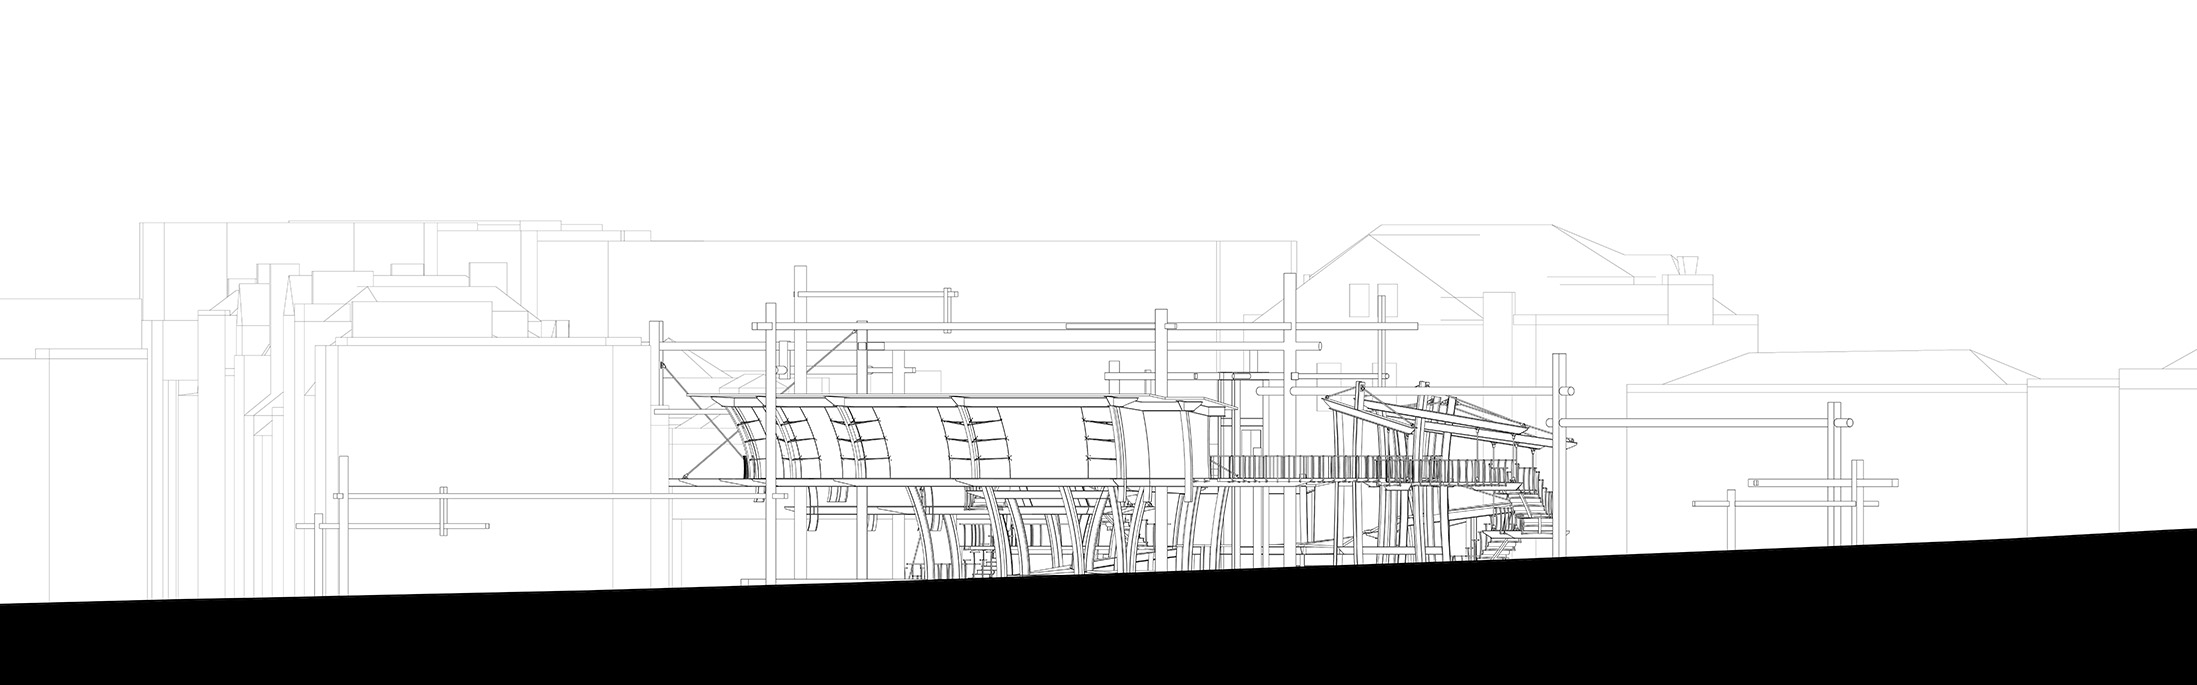 Elevation line drawing by Theo Galvin.